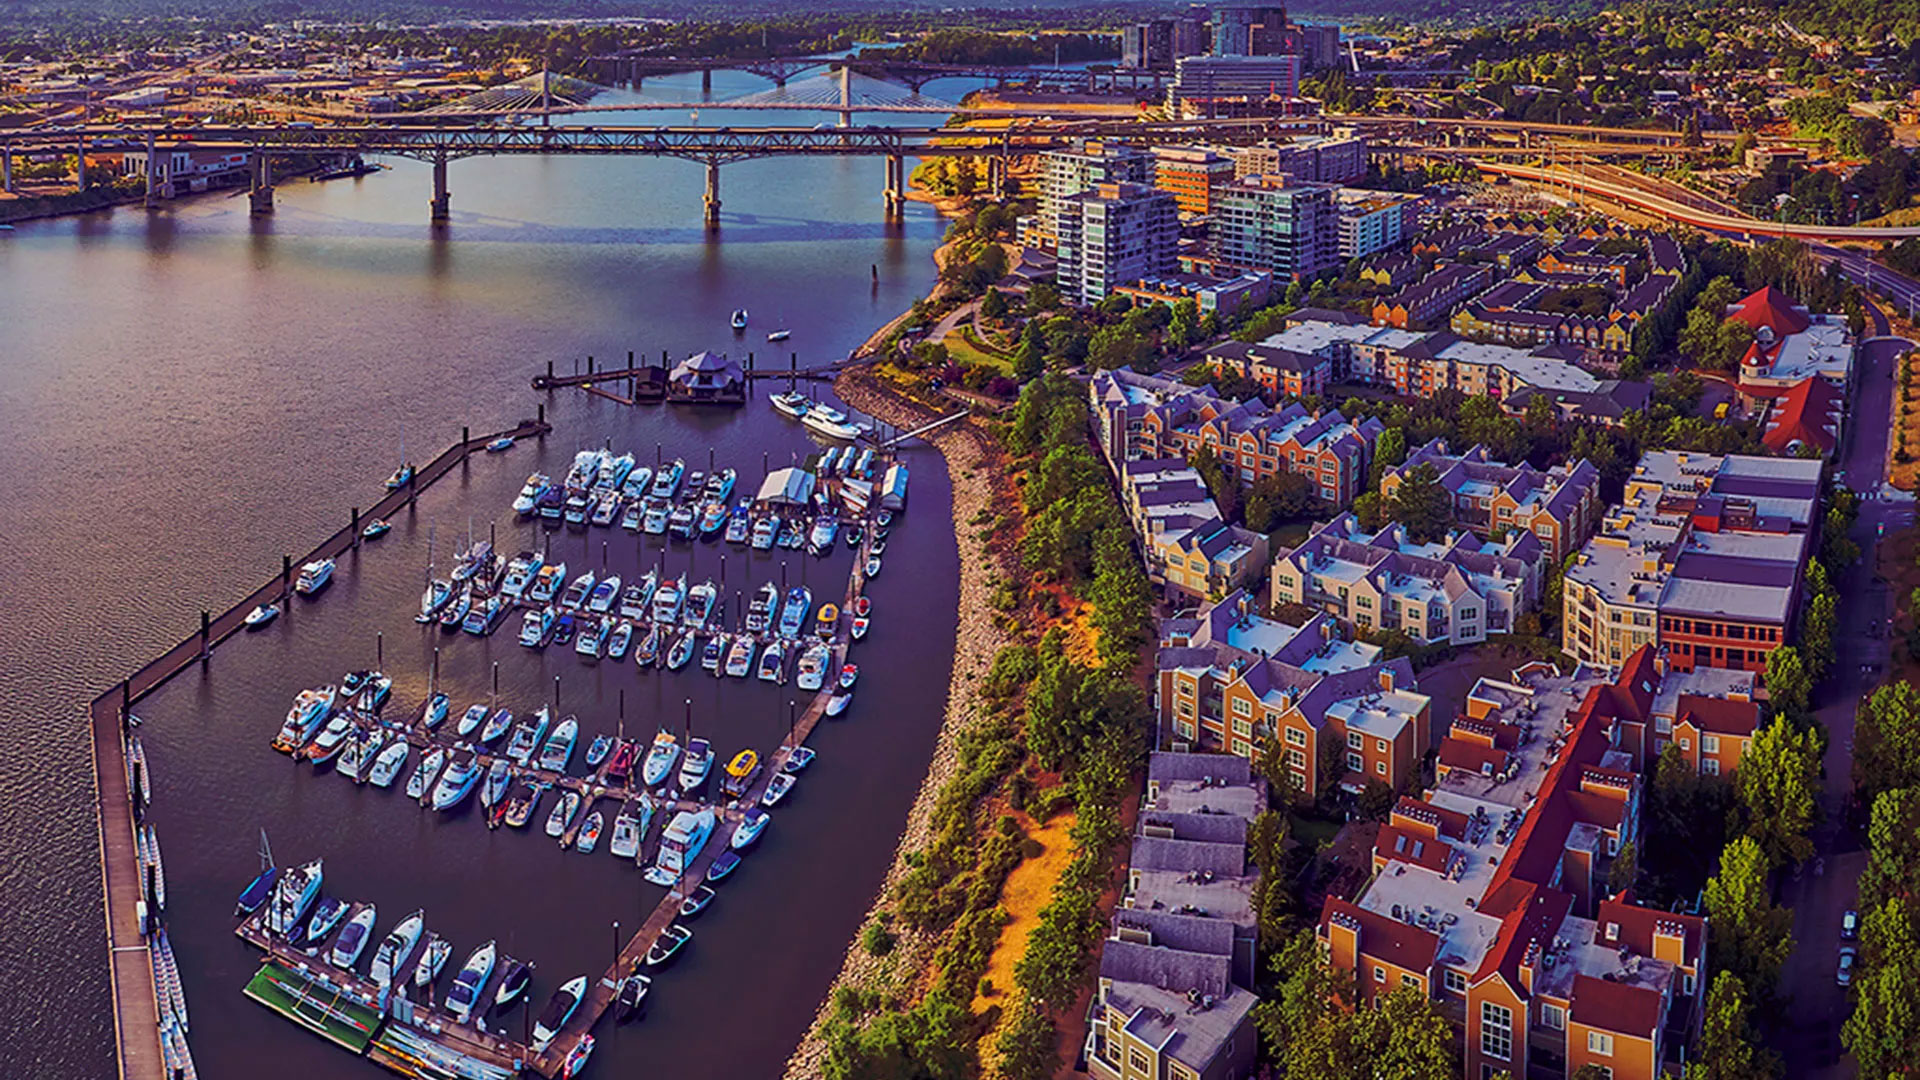 Aerial view of Portland, Oregon. Boats in a harbor with bridges and downtown in the background.